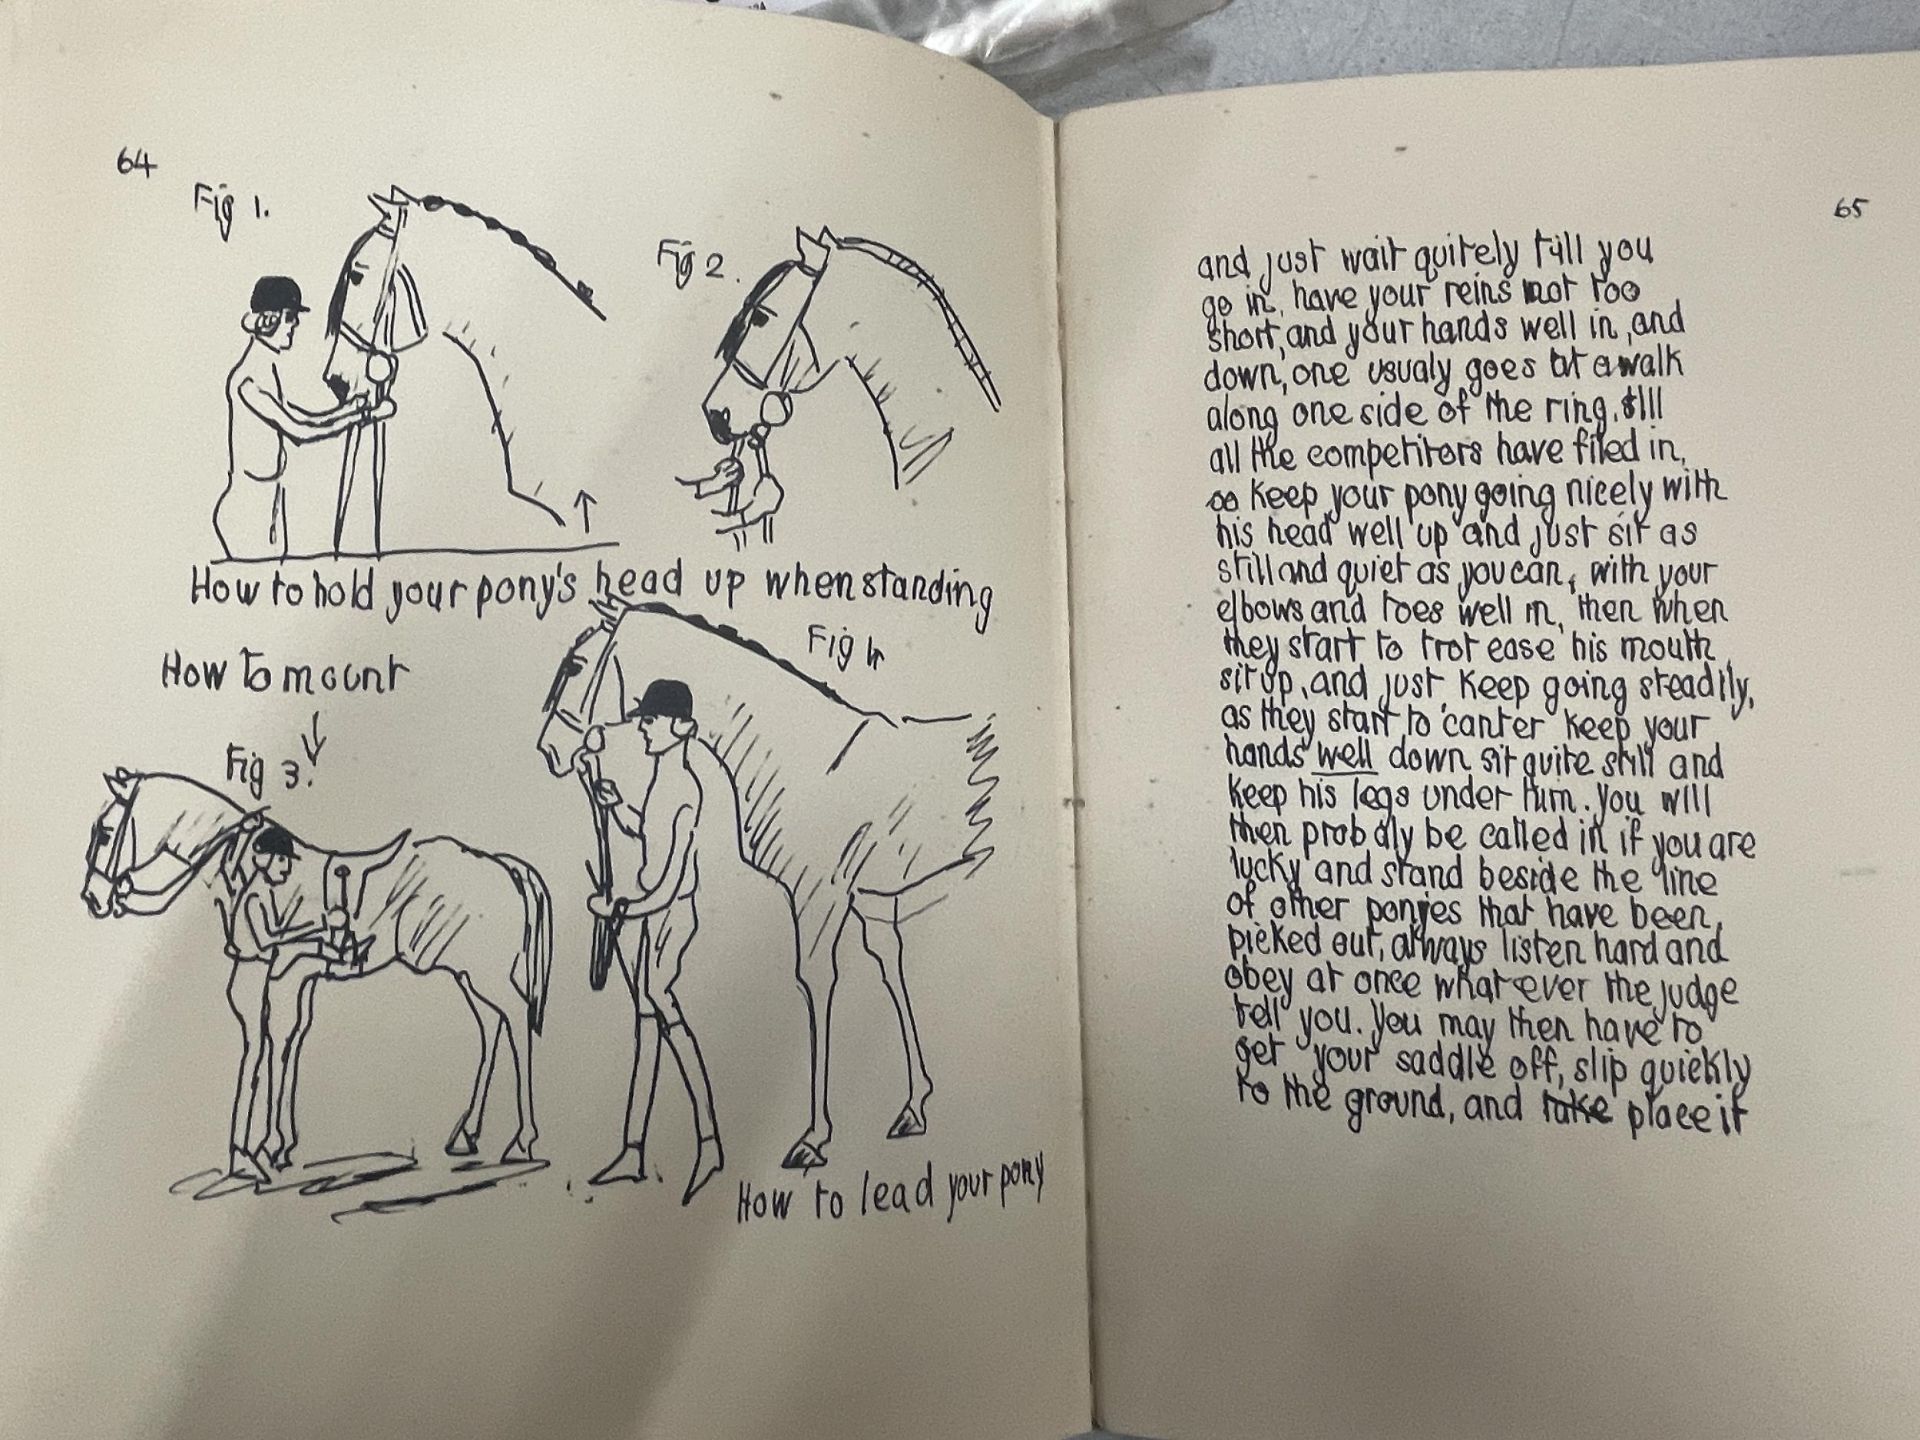 A VINTAGE BOOK ENTITLED HORSEMANSHIP AS IT IS TODAY BY SARAH BOWES LYON ILLUSTRATED BY THE AUTHOR - Image 9 of 9